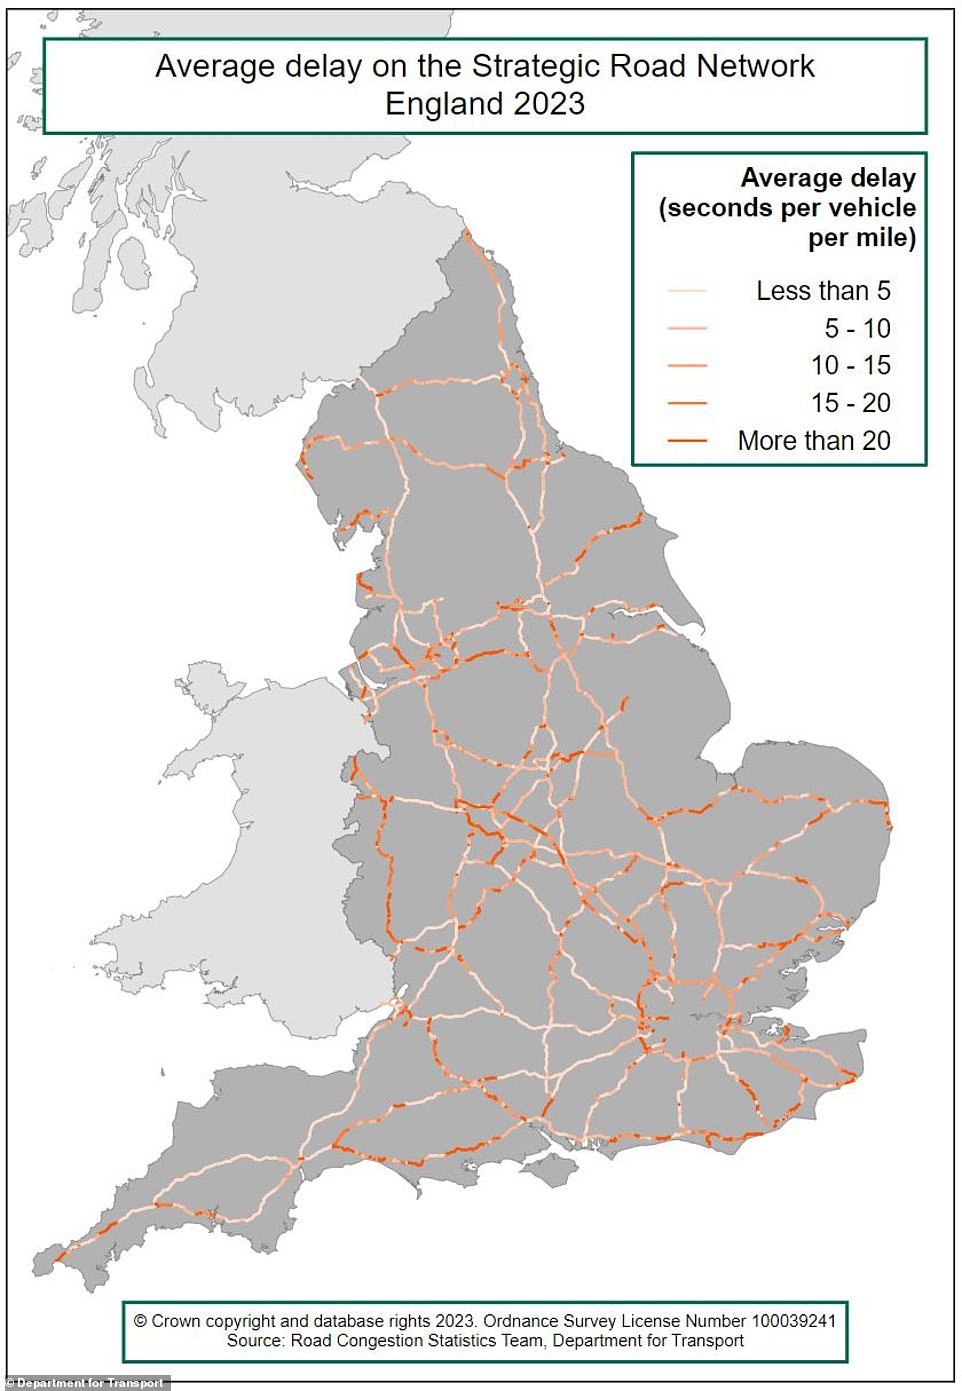 This map of England shows which motorways and main roads, managed by National Highways, have the longest and shortest delays, based on 2023 figures.